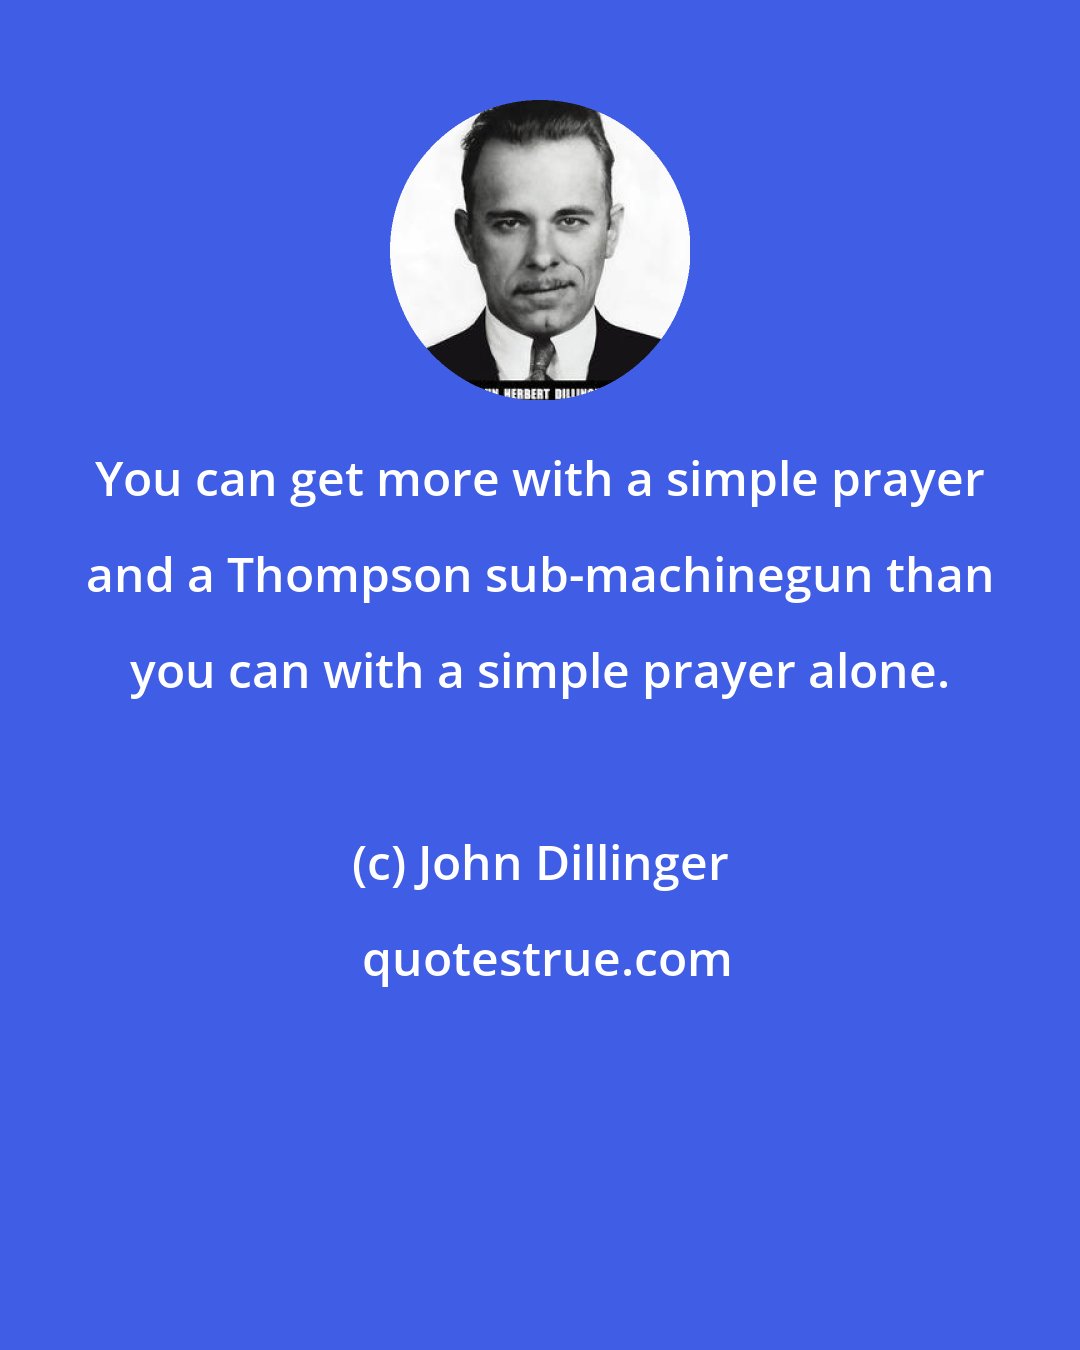 John Dillinger: You can get more with a simple prayer and a Thompson sub-machinegun than you can with a simple prayer alone.